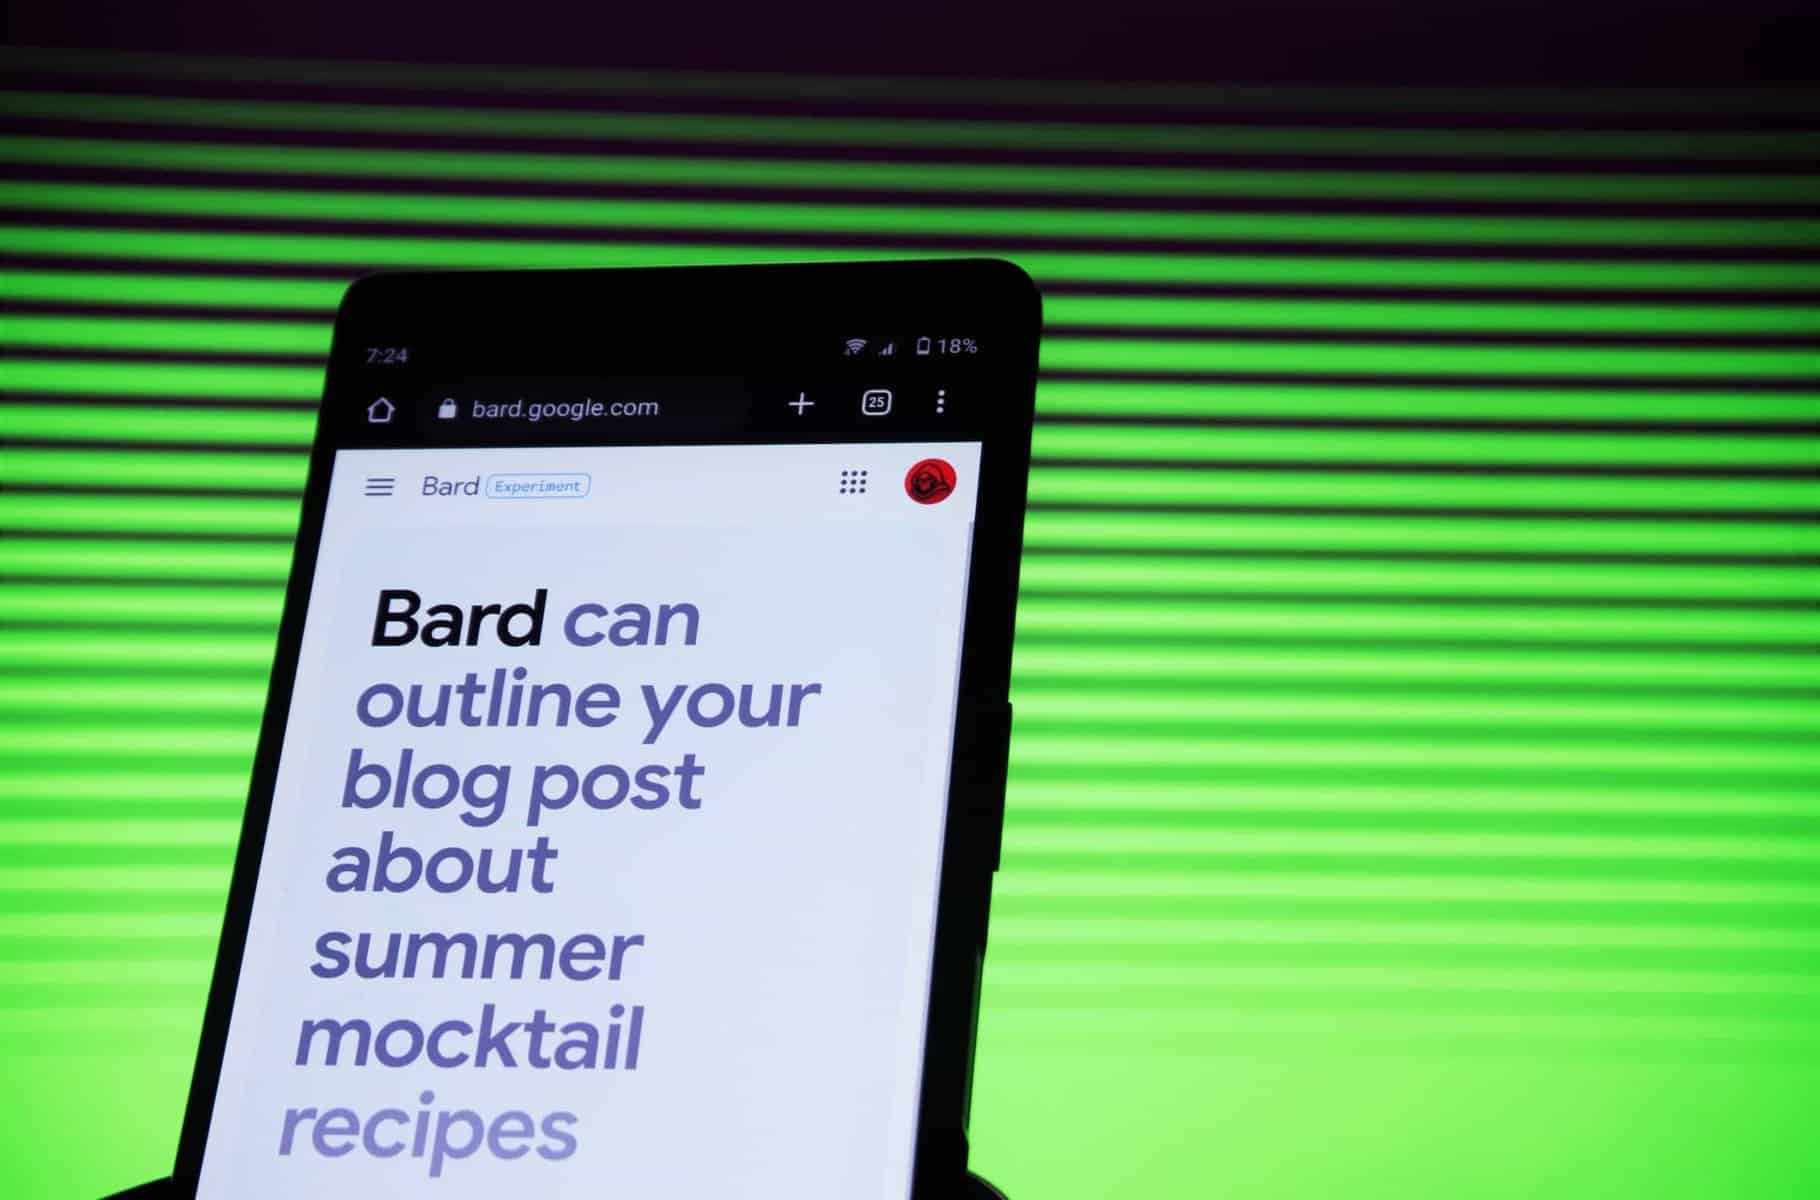 What is Google Bard? – what is it used for?